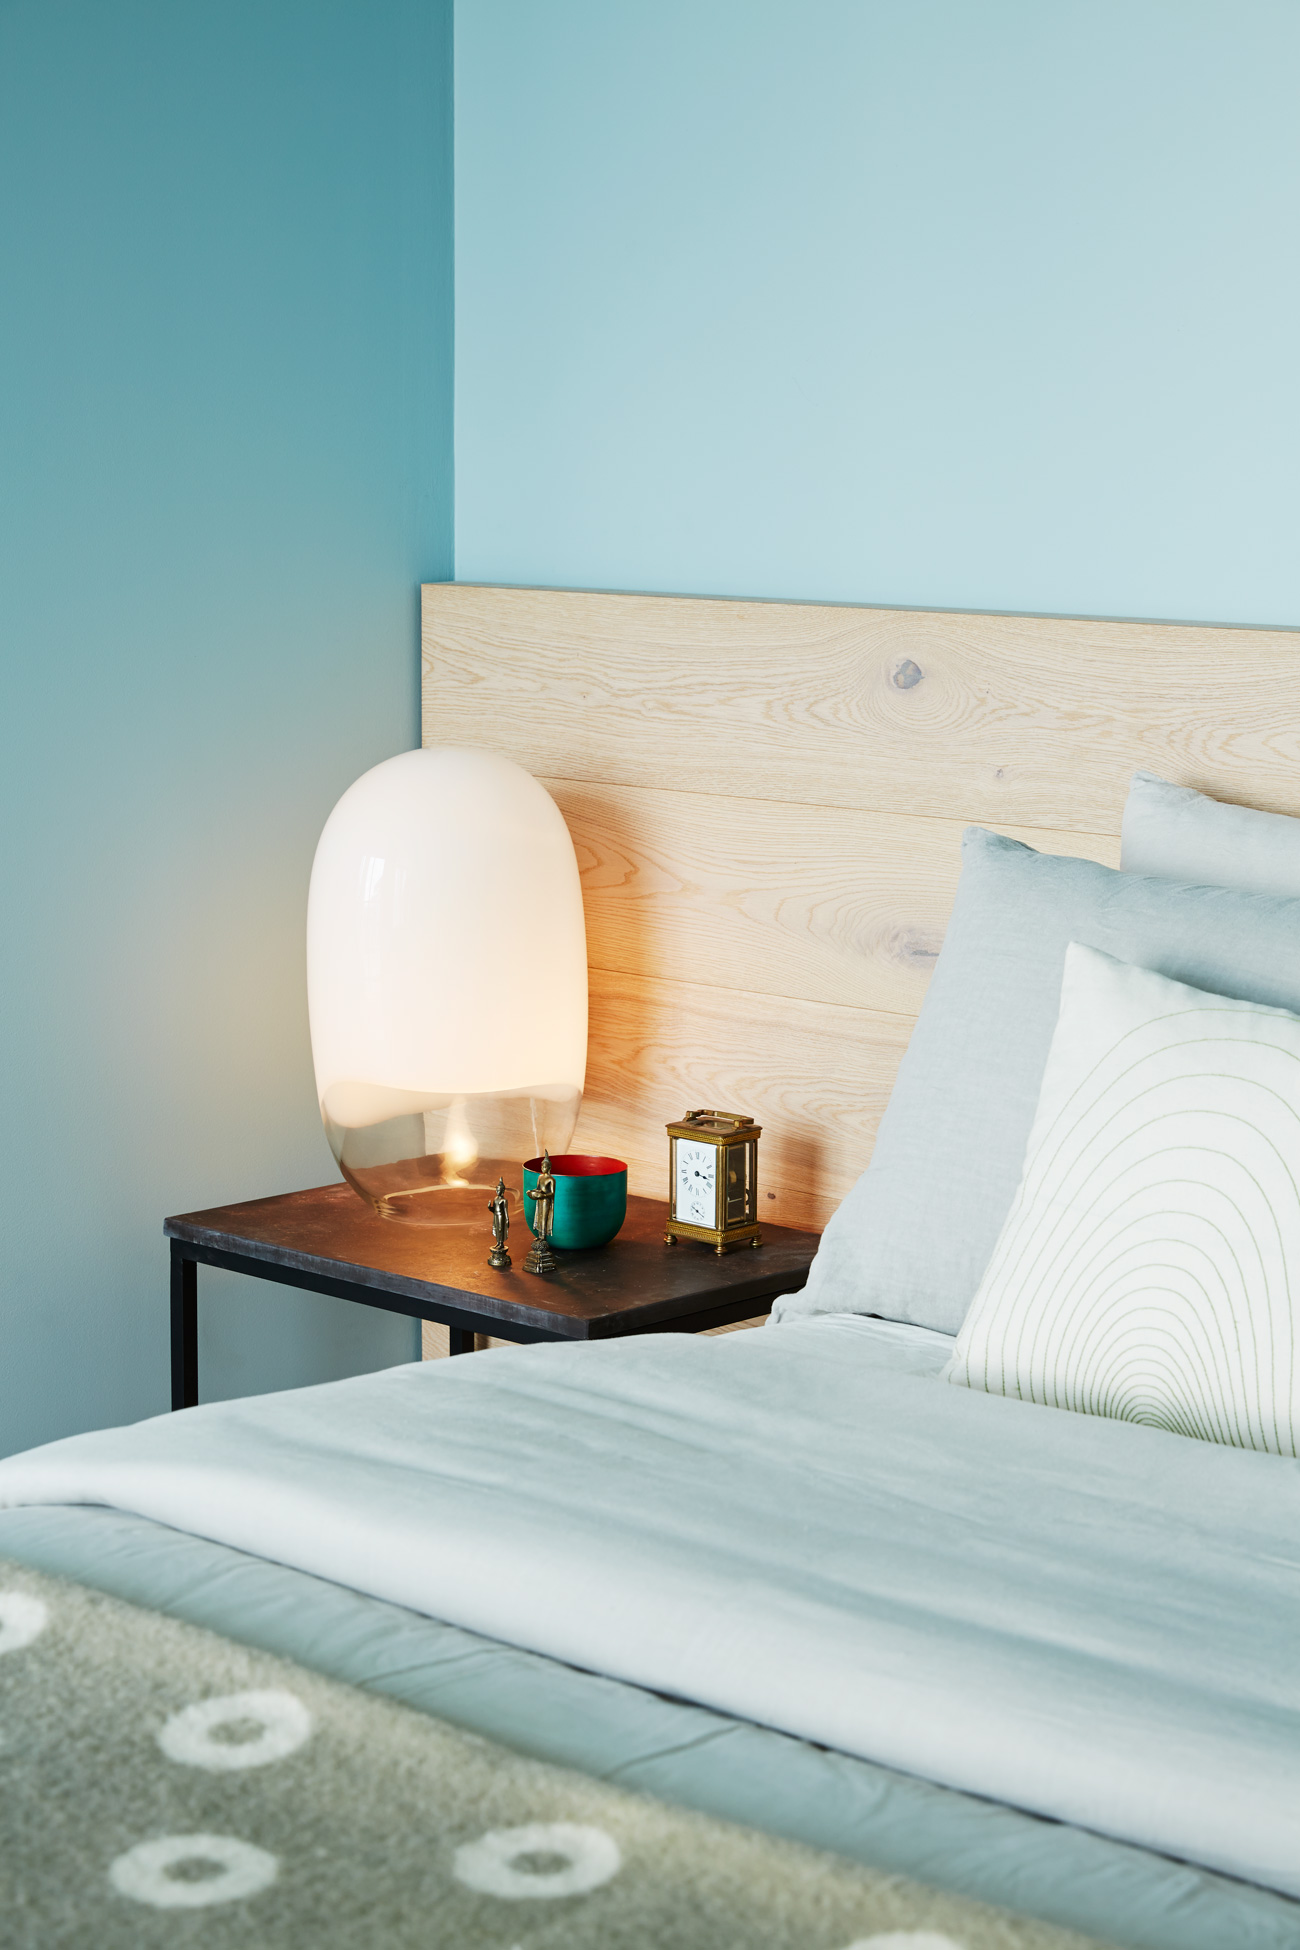 Surplus oak flooring was used to build a wall-to-wall headboard. The grey-blue picks up the wood’s muted veining. Vintage Ghost lamp from Zig Zag; blanket by Pia Wallen.